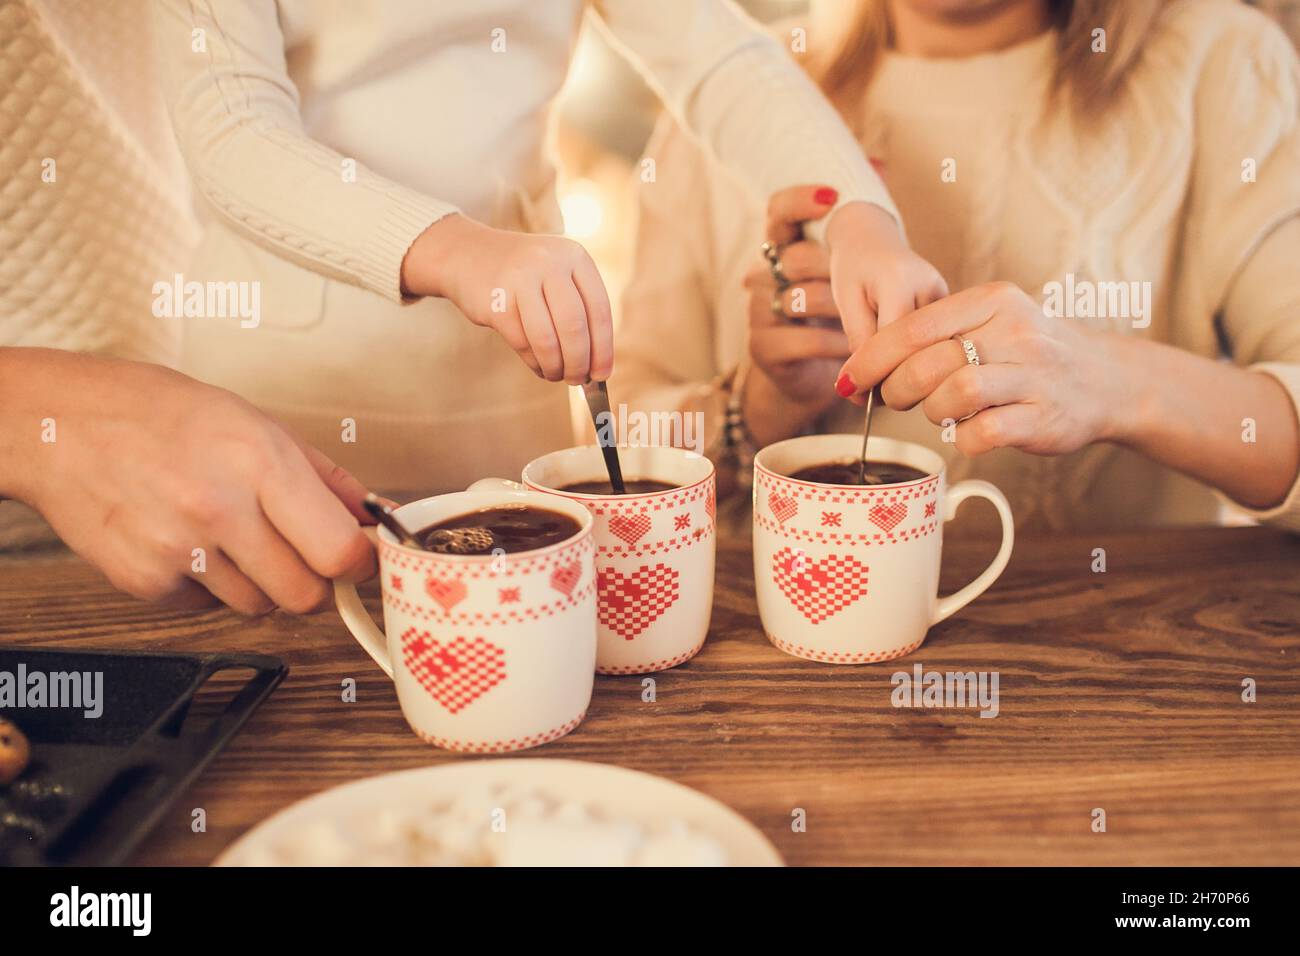 A cup with heart-shaped marshmallows, close-up on a blue wooden background.  Stock Photo by puhimec